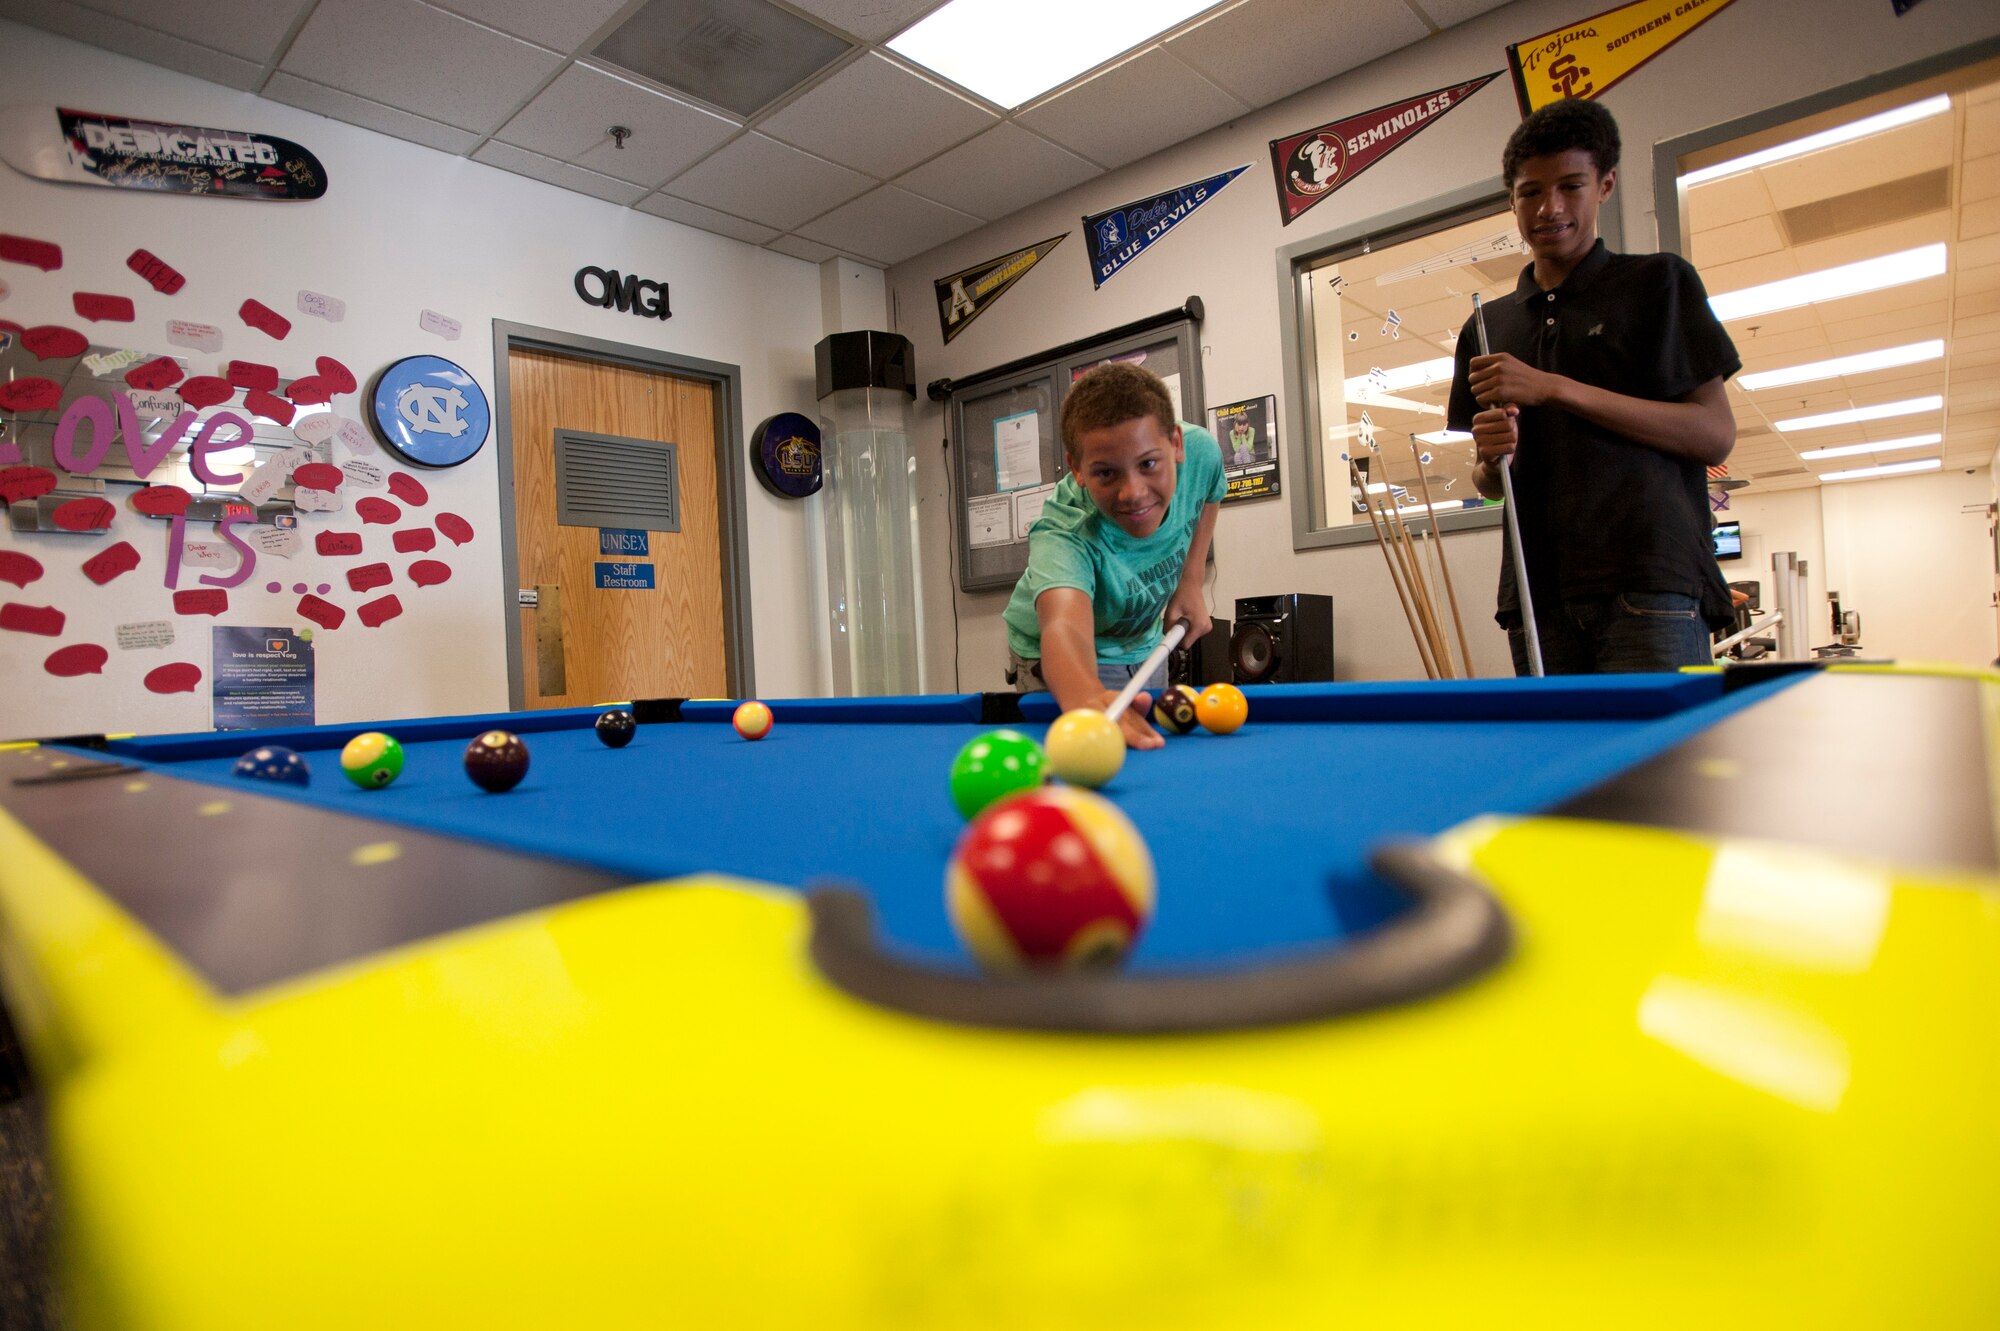 Thomas lines up a shot as Marcus watches during a billiard game at the 99th Force Support Squadron Youth Center June 5, 2014, Nellis Air Force Base, Nev. The youth center has two billiard tables available for use to children and teens. (U.S. Air Force photo by Senior Airman Timothy Young)